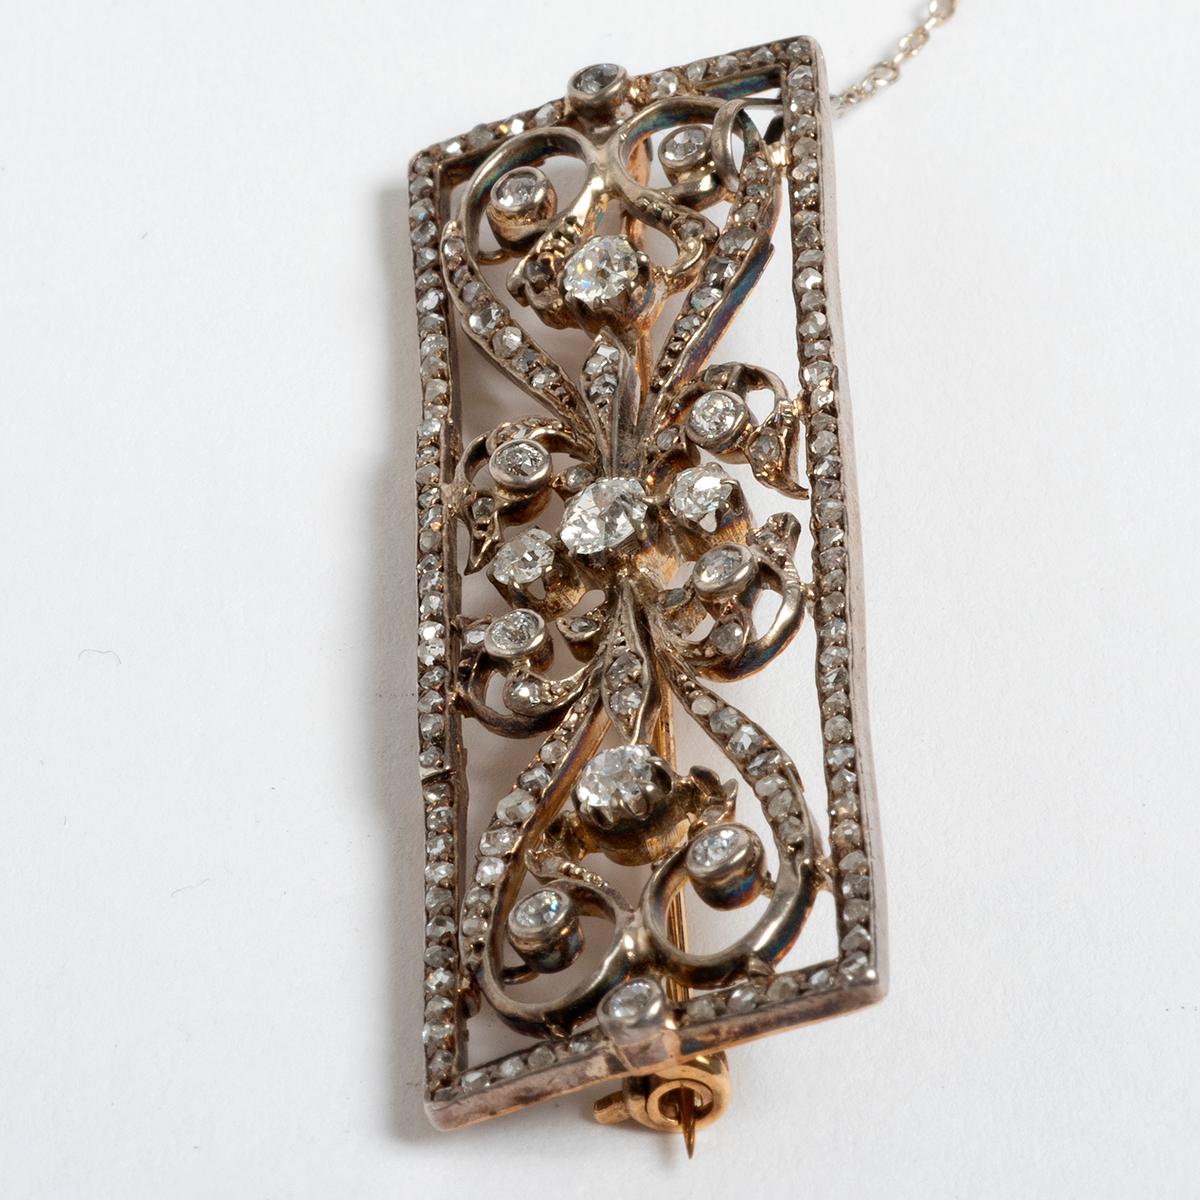 This exquisite Edwardian diamond brooch is set in 18K white gold and is dated circa 1910. With keeper, this rare piece measures 50mm in length . A unique and collectable jewellery item.